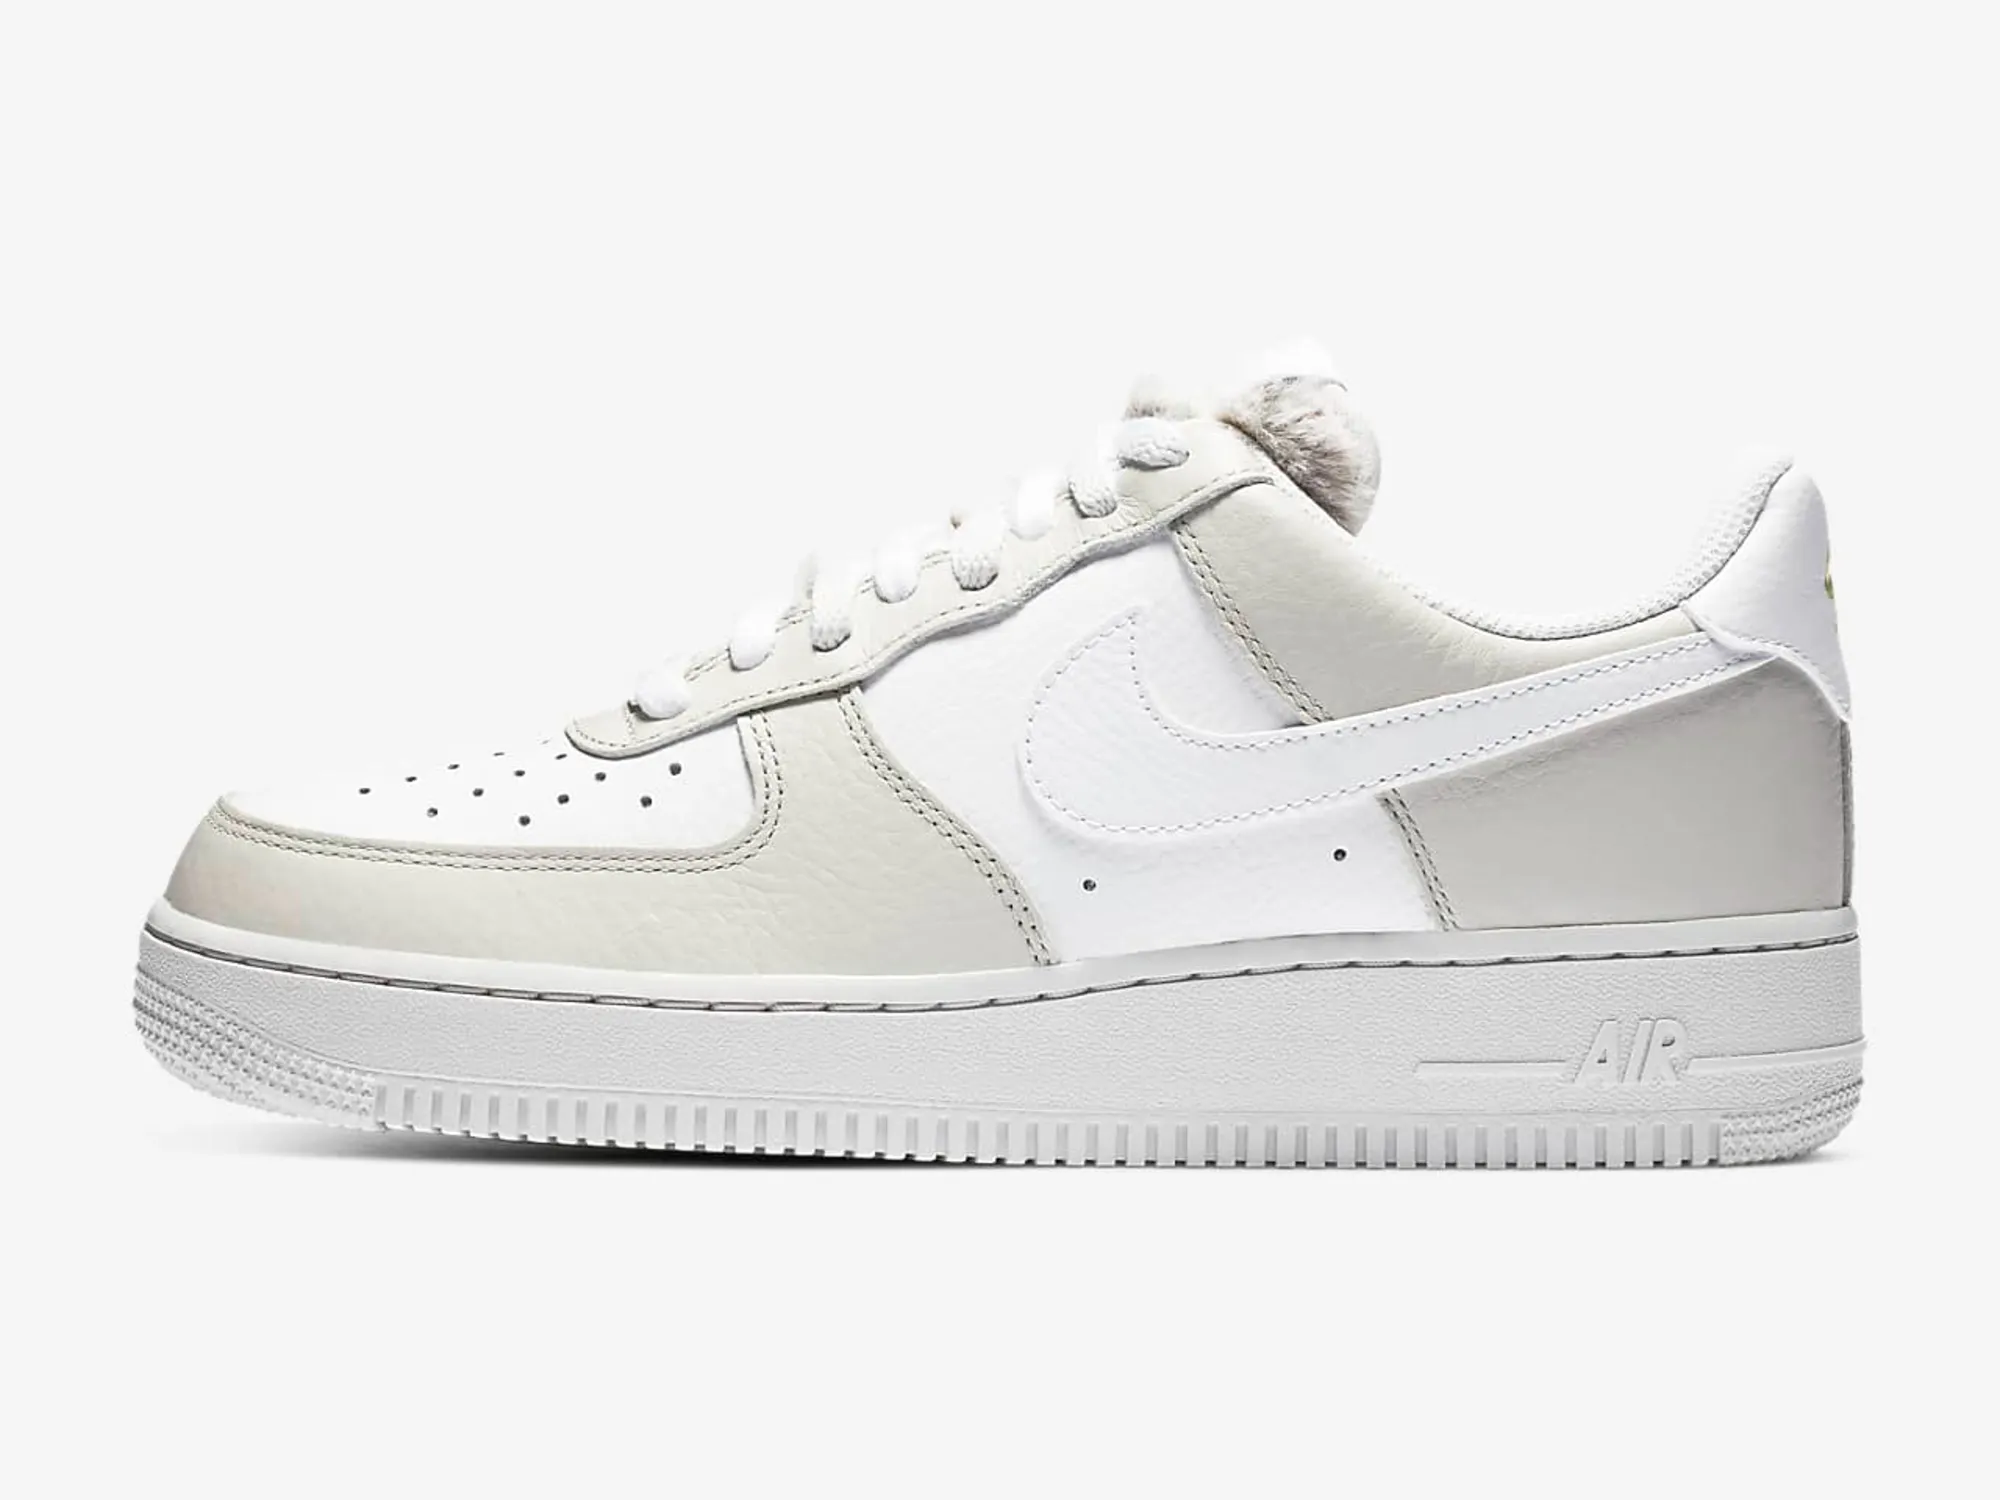 Cop This Week's 20 Trending Nike Air Force 1s | The Sole Supplier